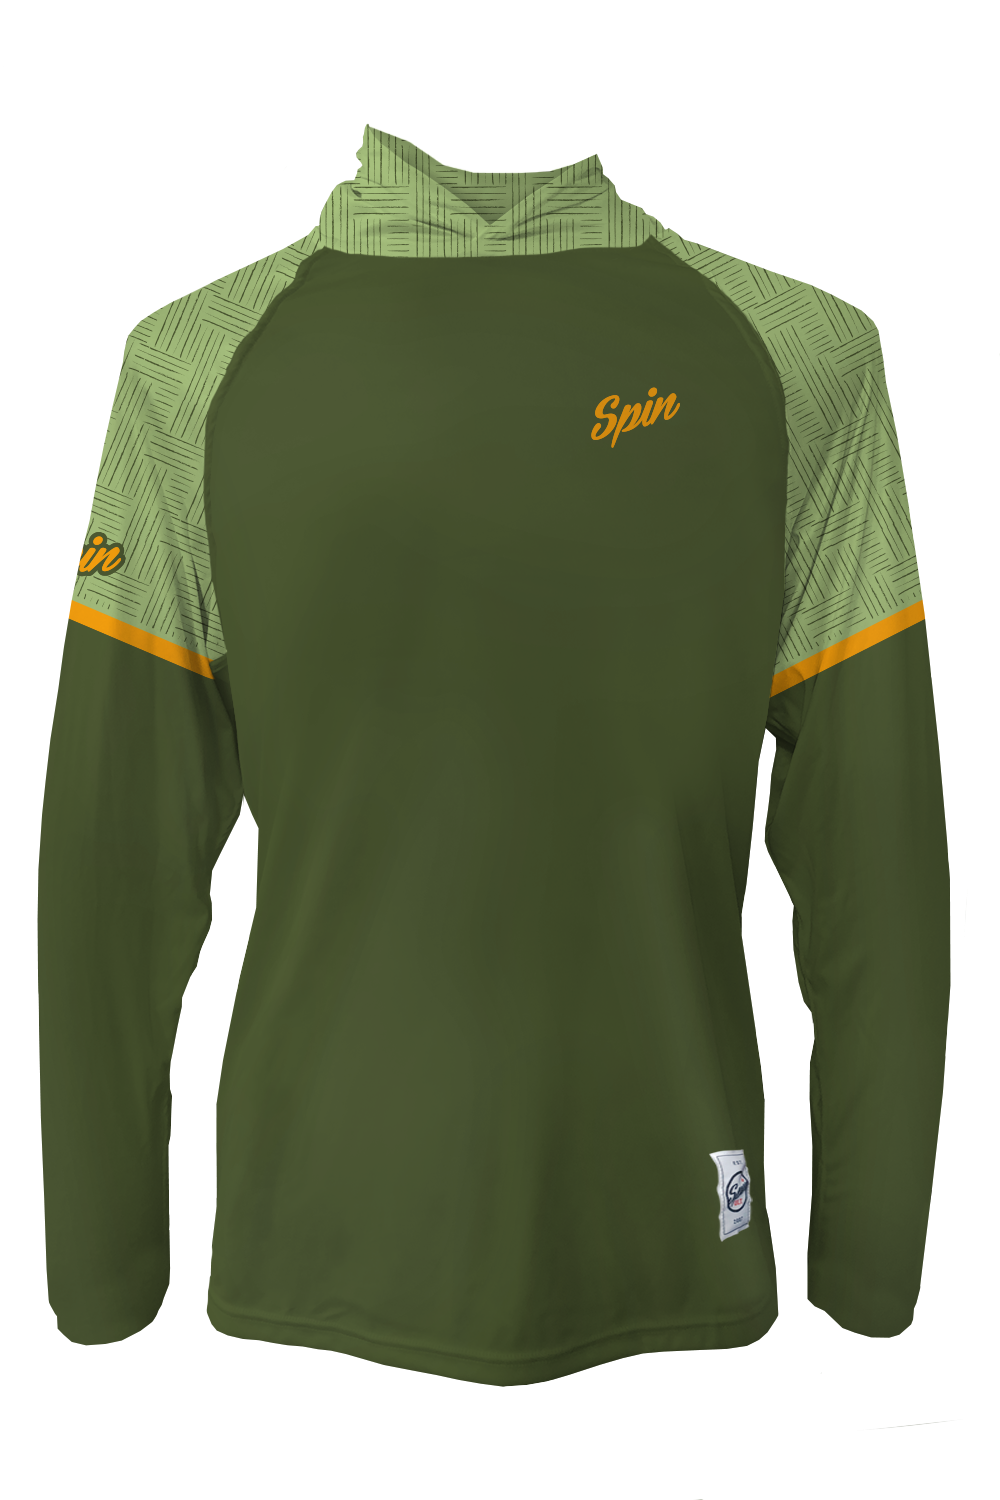 Liquid hustle - ultimate frisbee jerseys, Clothing or apparel contest